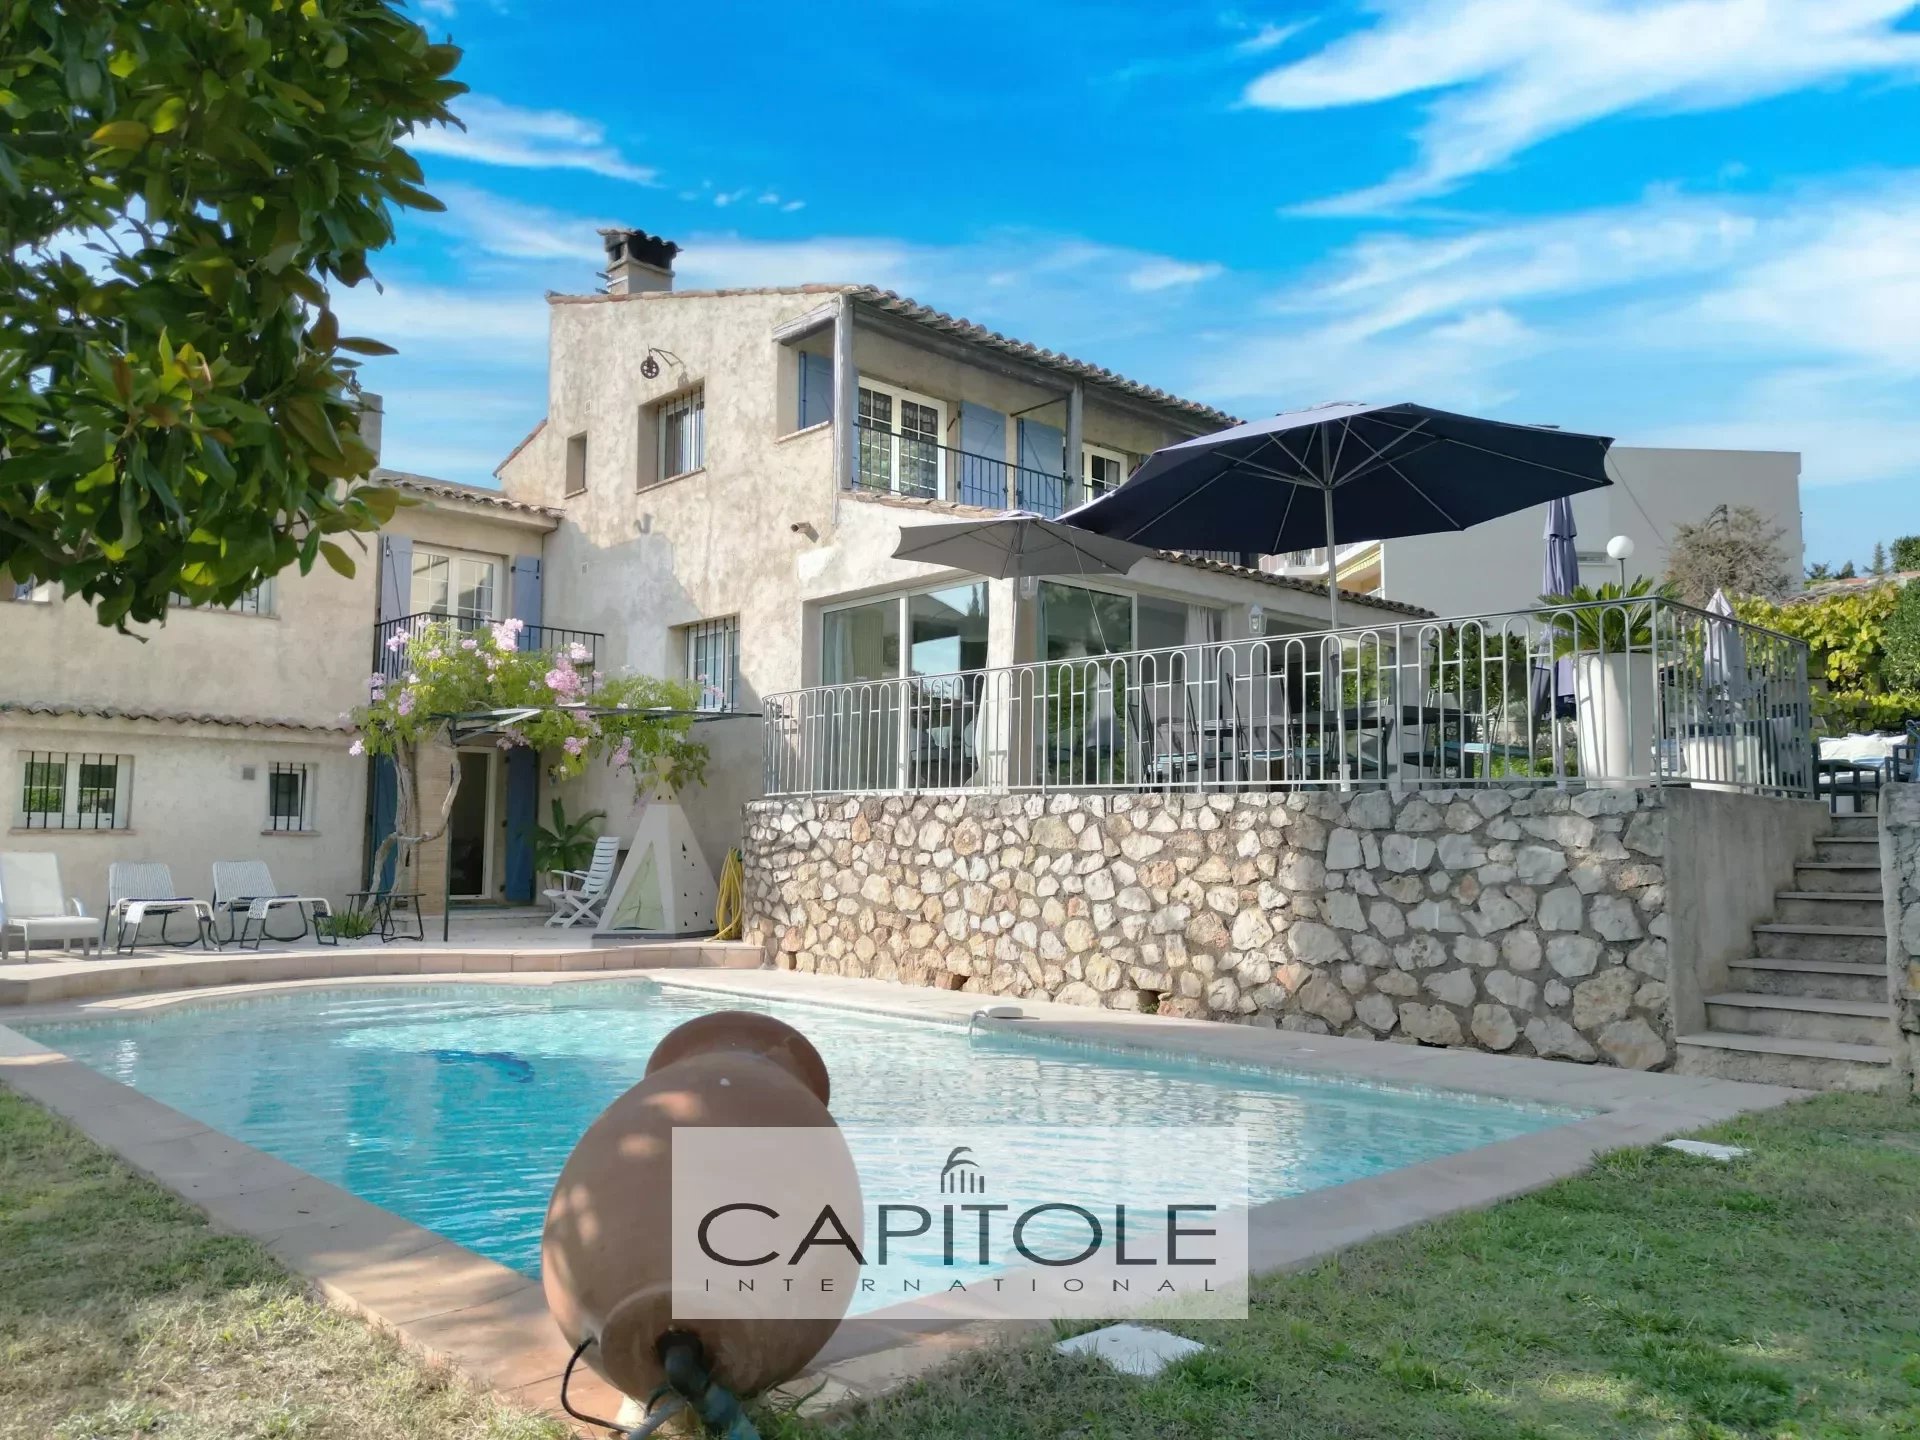 ANTIBES Steps from the town center , elegant villa of 245 sqm, land of 1 360 sqm with pool